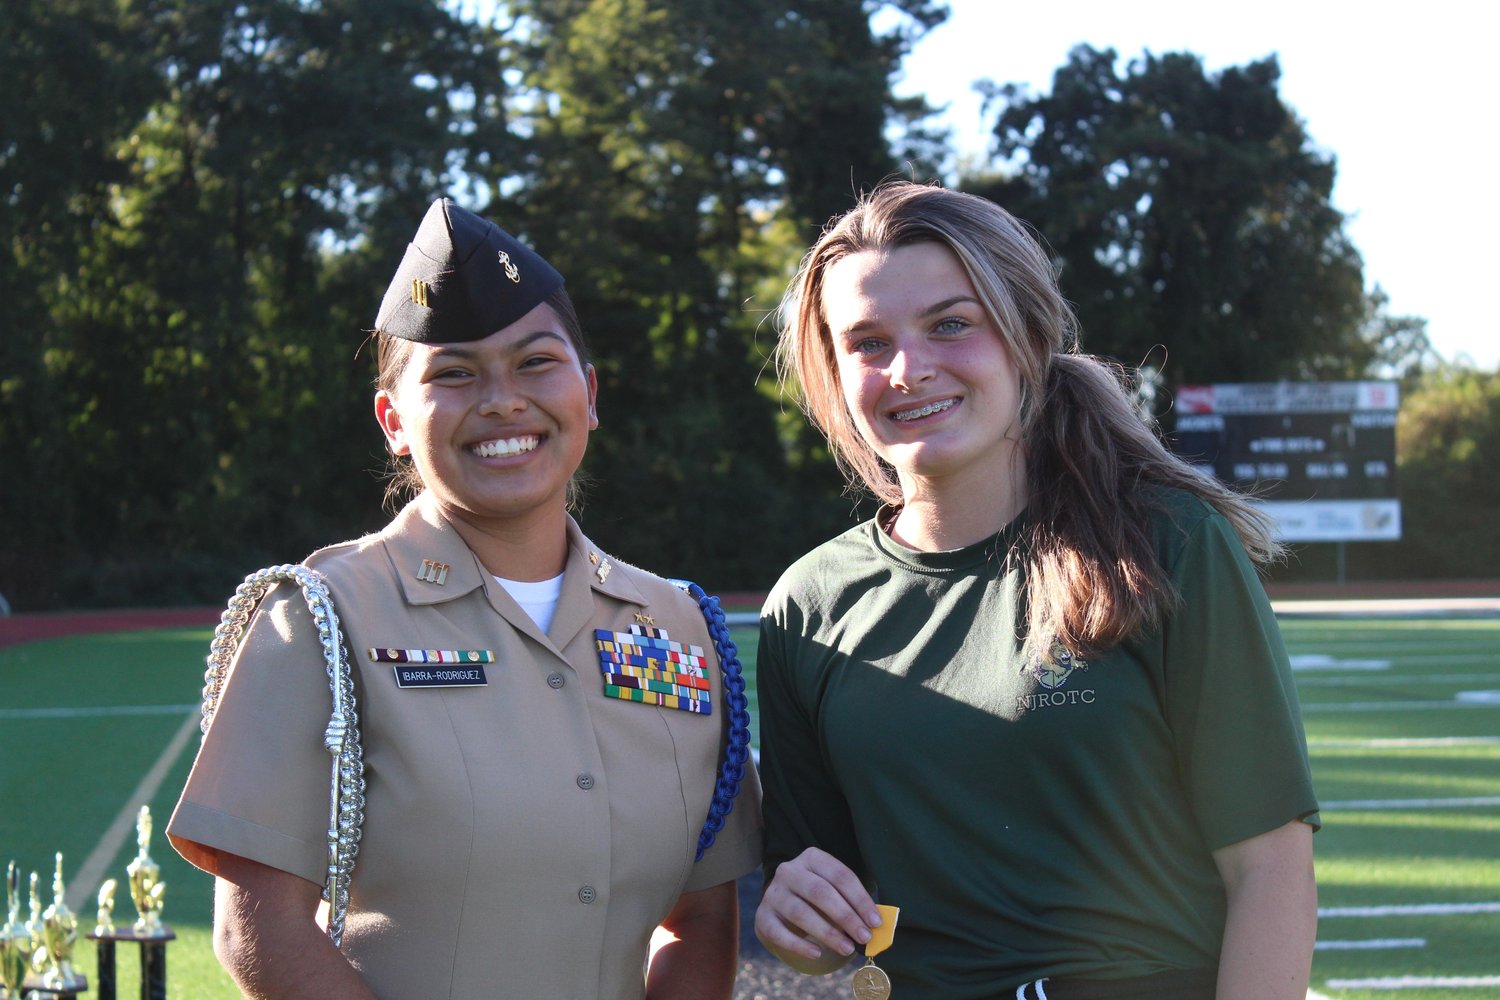 Cadet Lt. Emmelie Neff receives one of her three first-place sit-up medals. Neff averaged 331 sit-ups during competition at the Sprayberry, Lee County. Martin Luther King High School hosted meets.